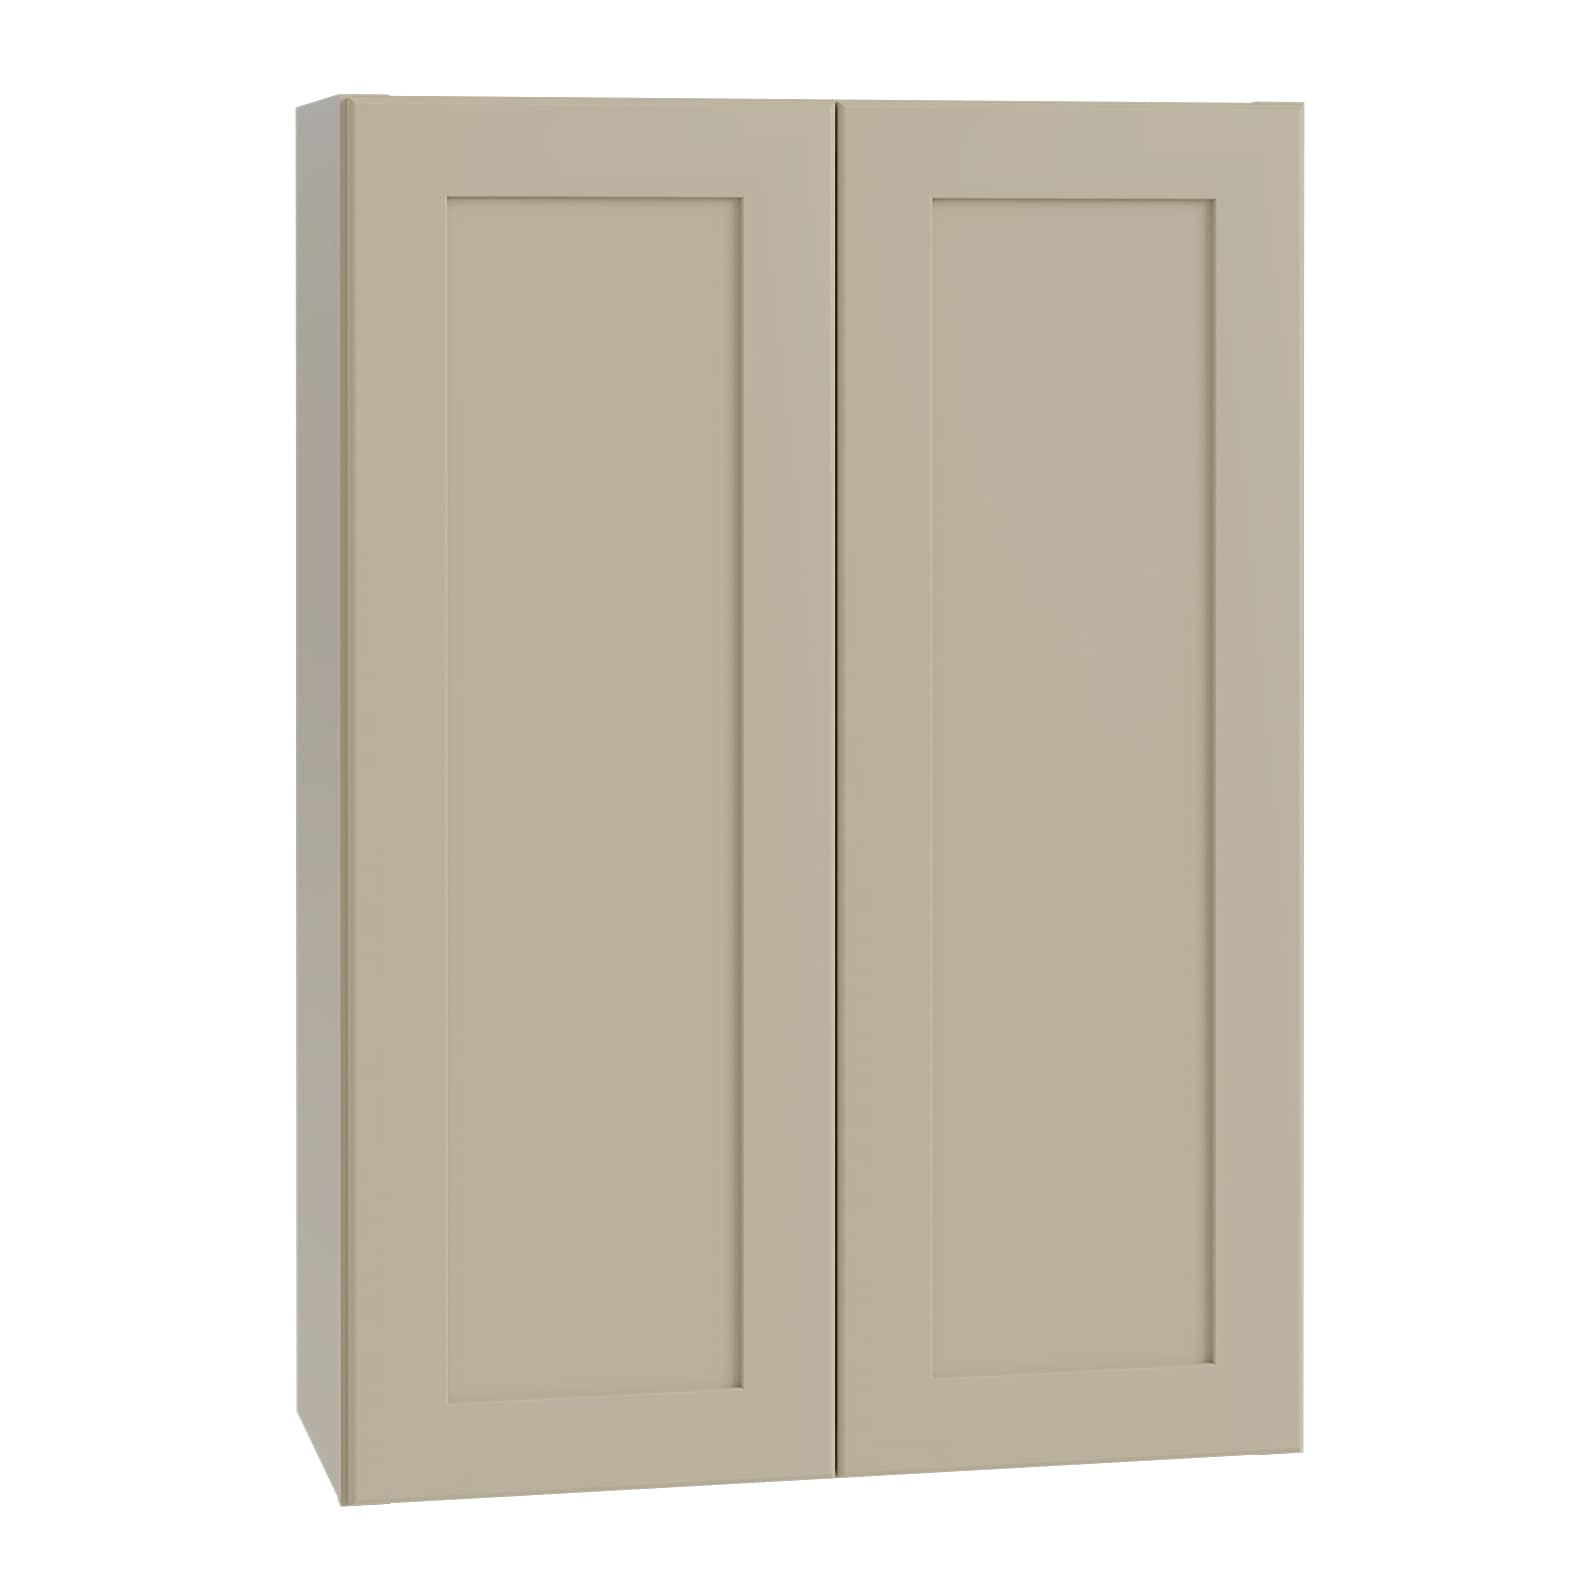 Luxxe Cabinetry 33-in W x 36-in H x 12-in D Norfolk Blended Cream Painted Door Wall Fully Assembled Semi-custom Cabinet in Off-White | W3336-NBC